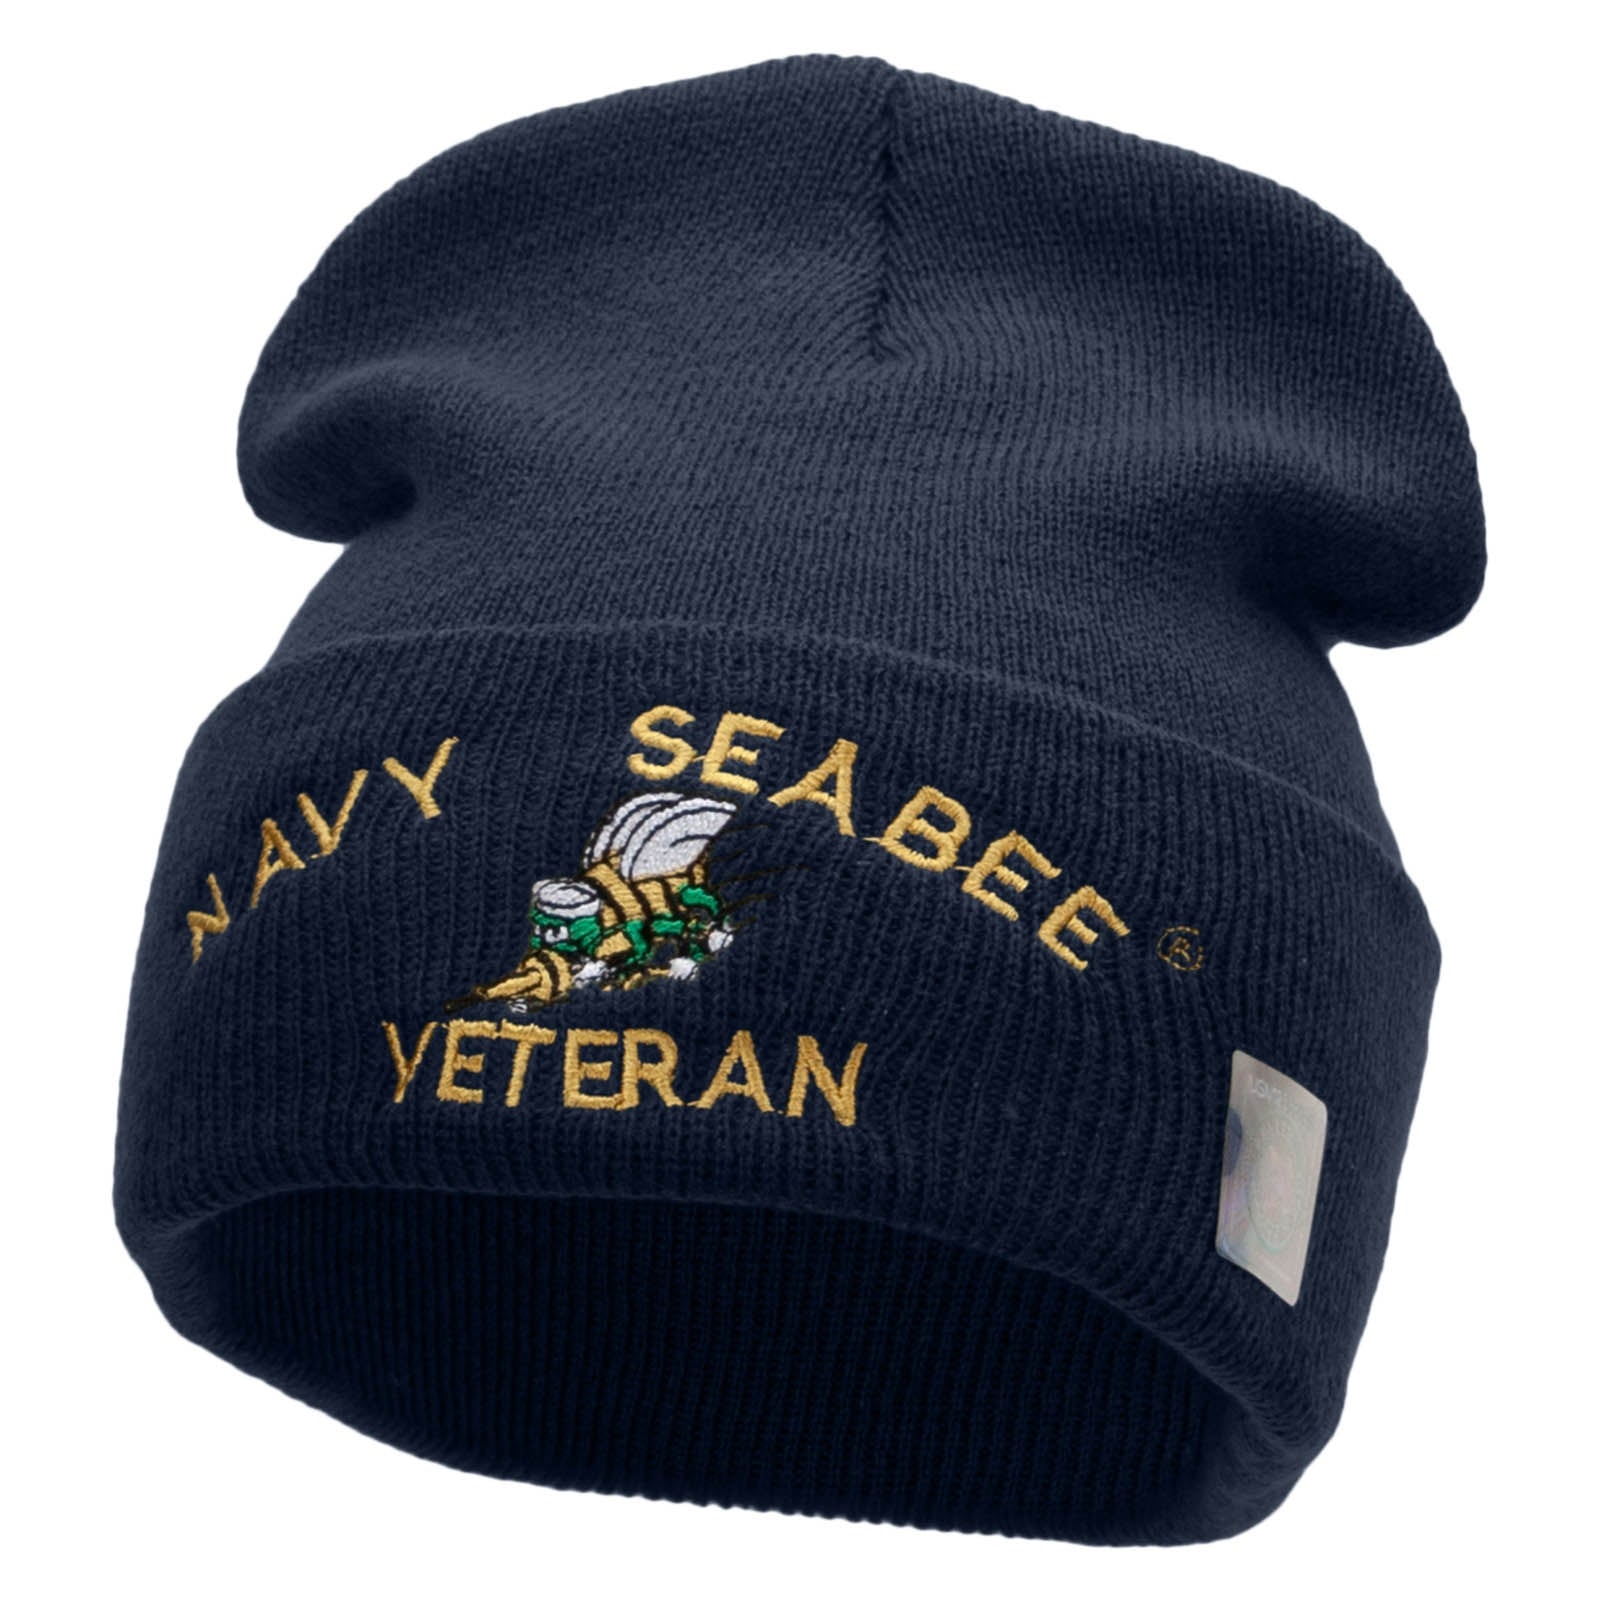 Licensed Navy Seabee Veteran Logo Embroidered Long Beanie Made in USA - Navy OSFM